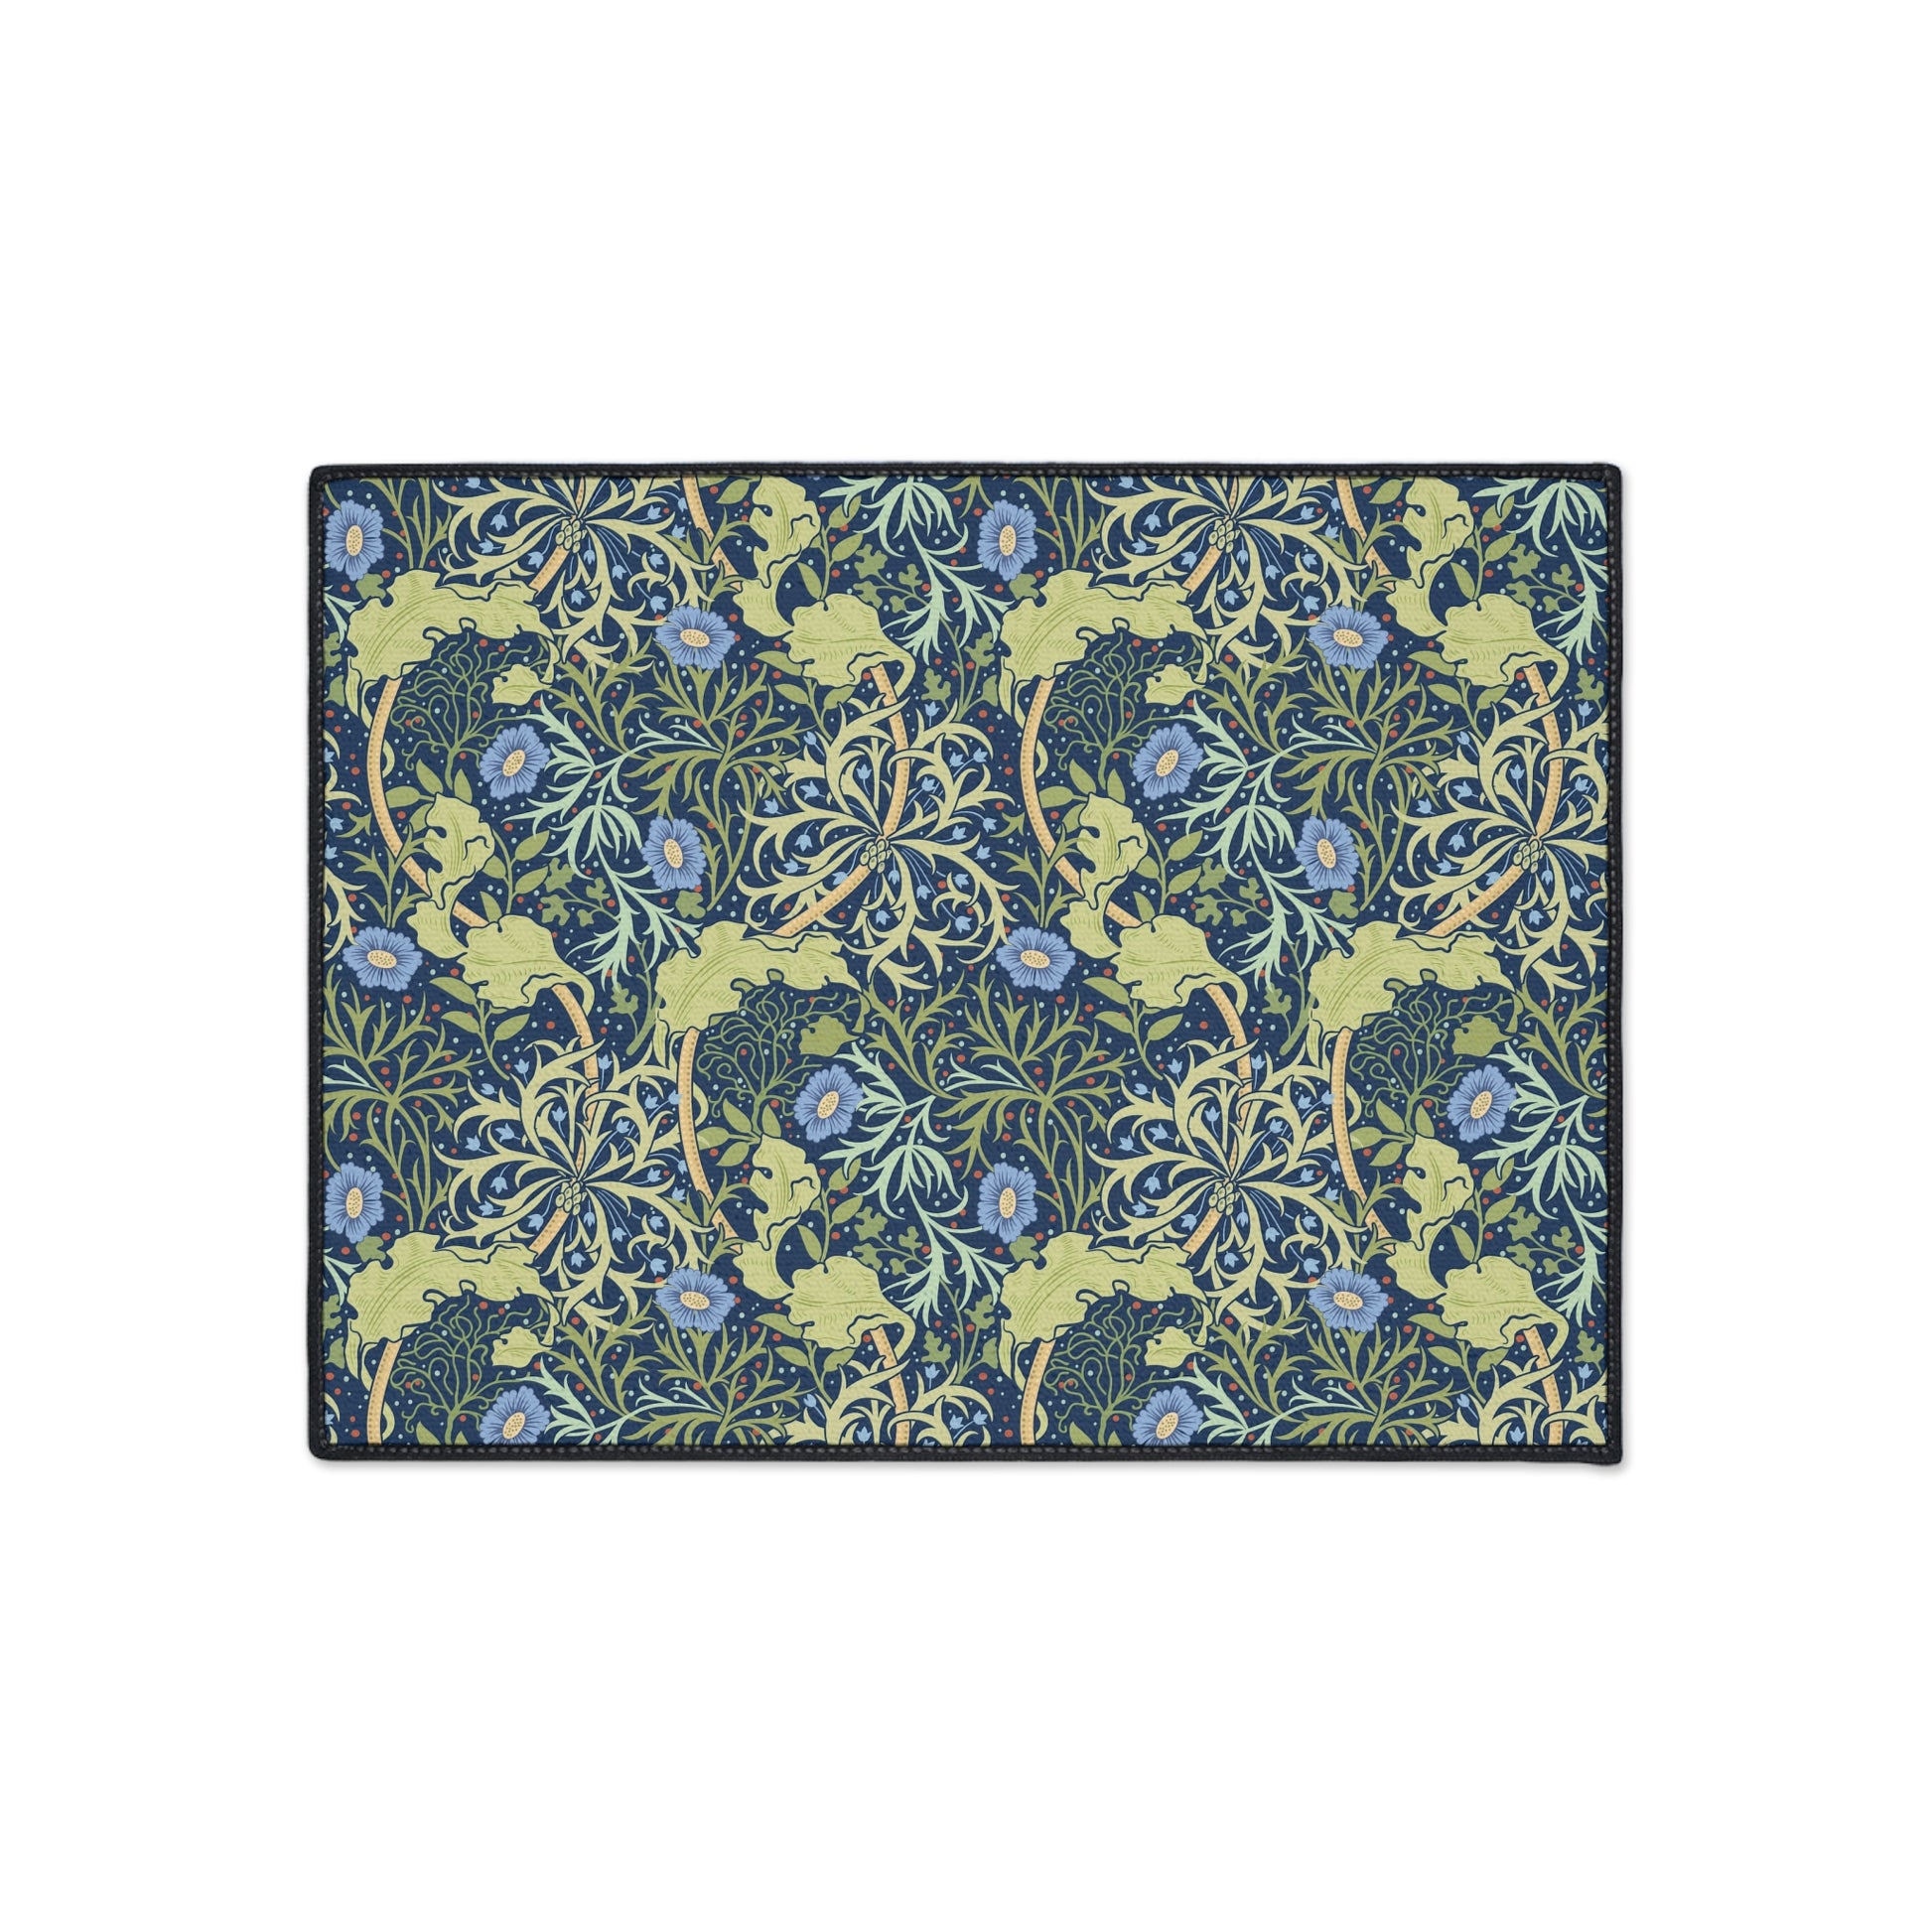 william-morris-co-heavy-duty-floor-mat-seaweed-collection-blue-flowers-5